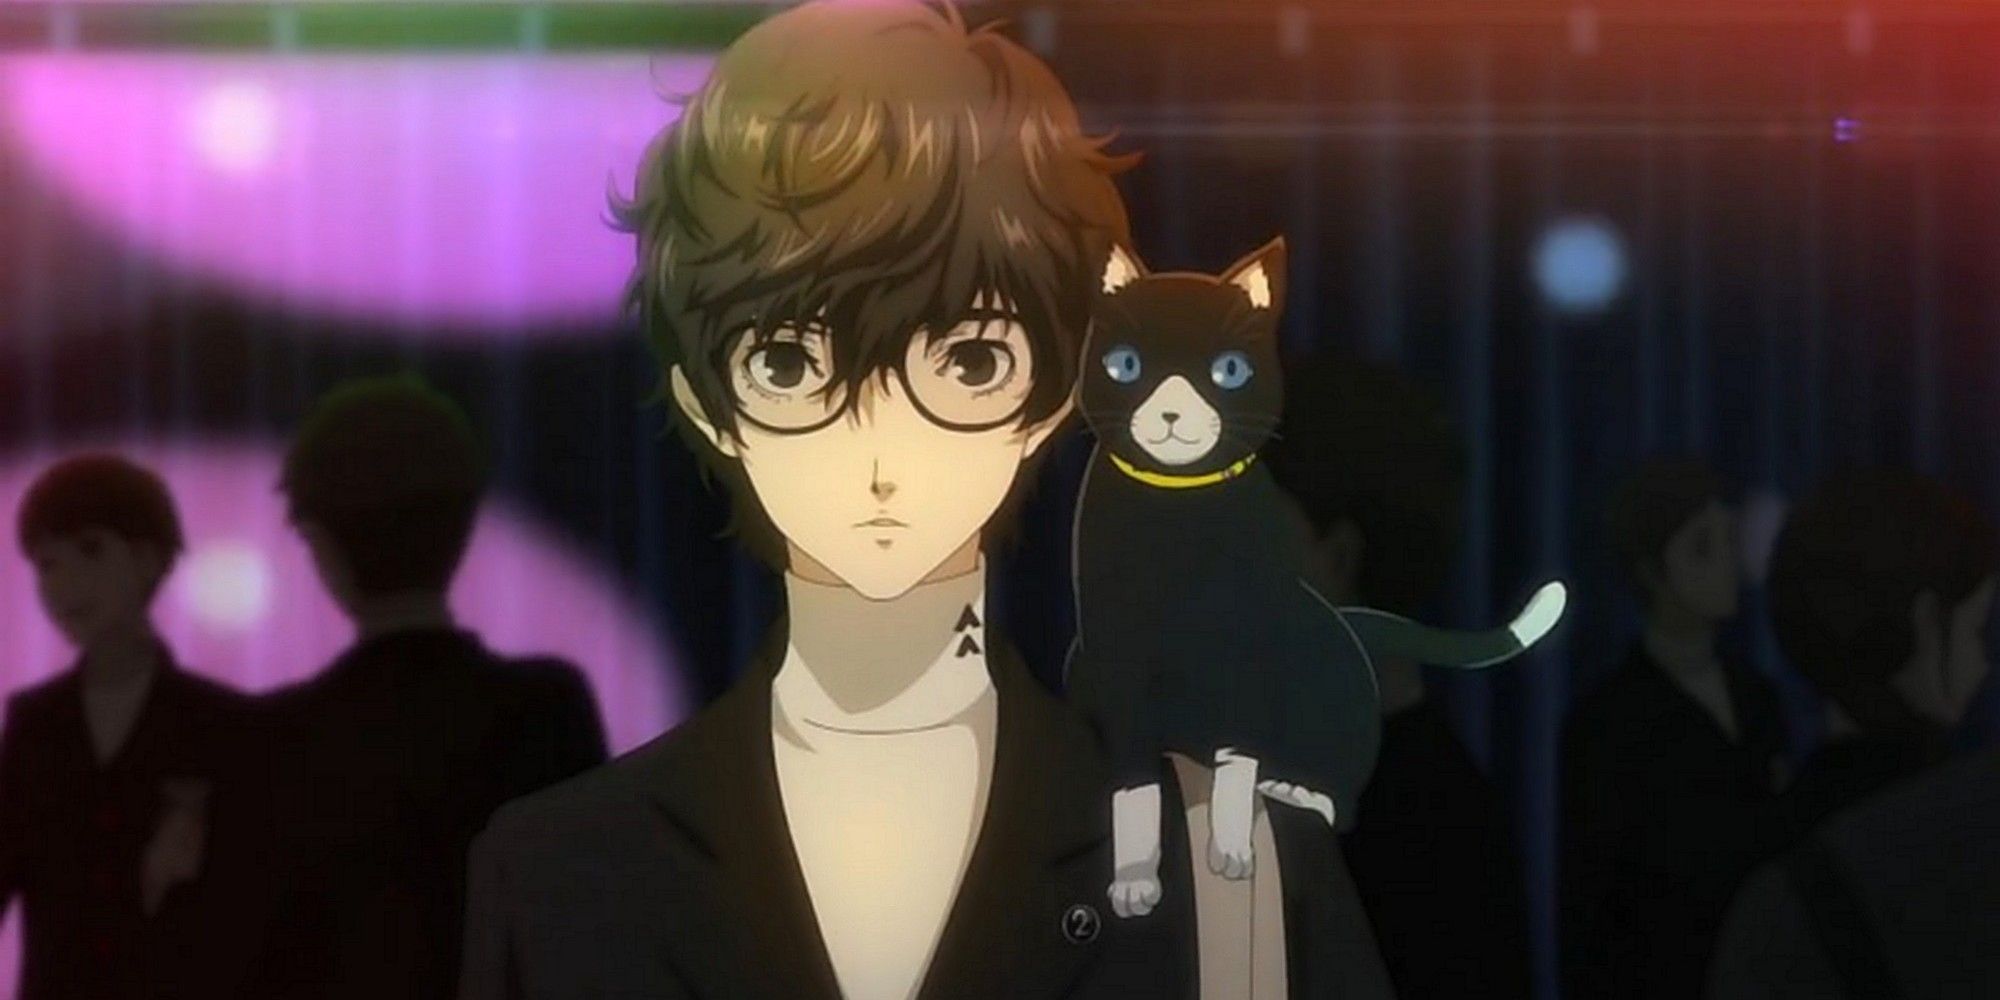 persona 5 royal joker and morgana from the anime in a club